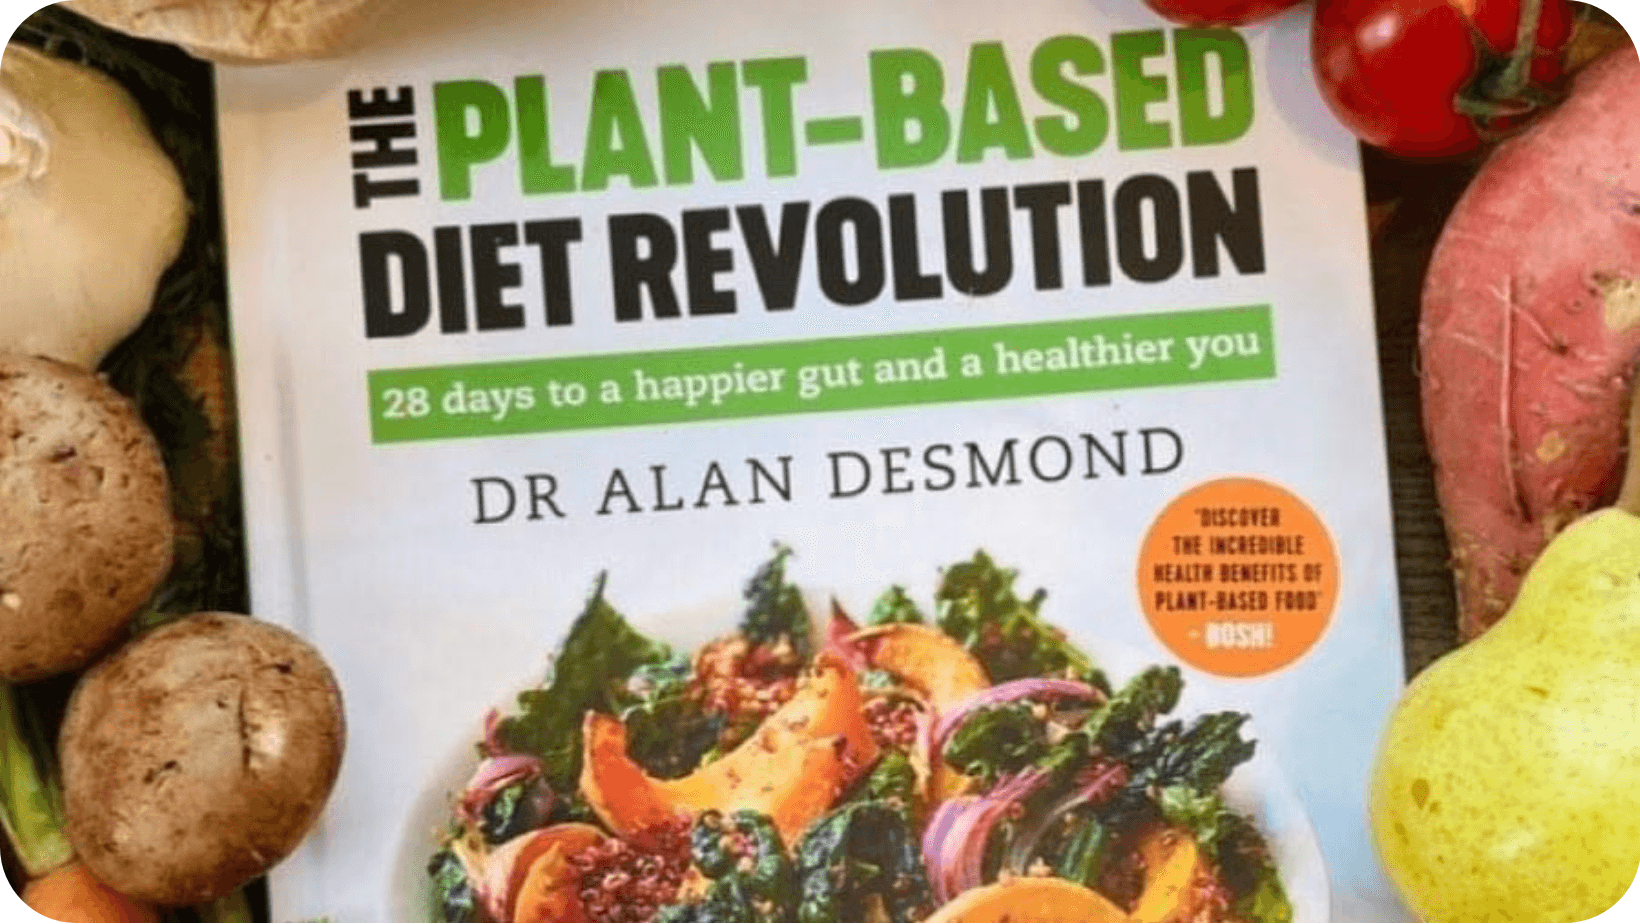 Dr Alan Desmond’s book - The Plant-Based Diet Revolution: 28 days to a happier gut and a healthier you - surrounded by fruit and vegetables 